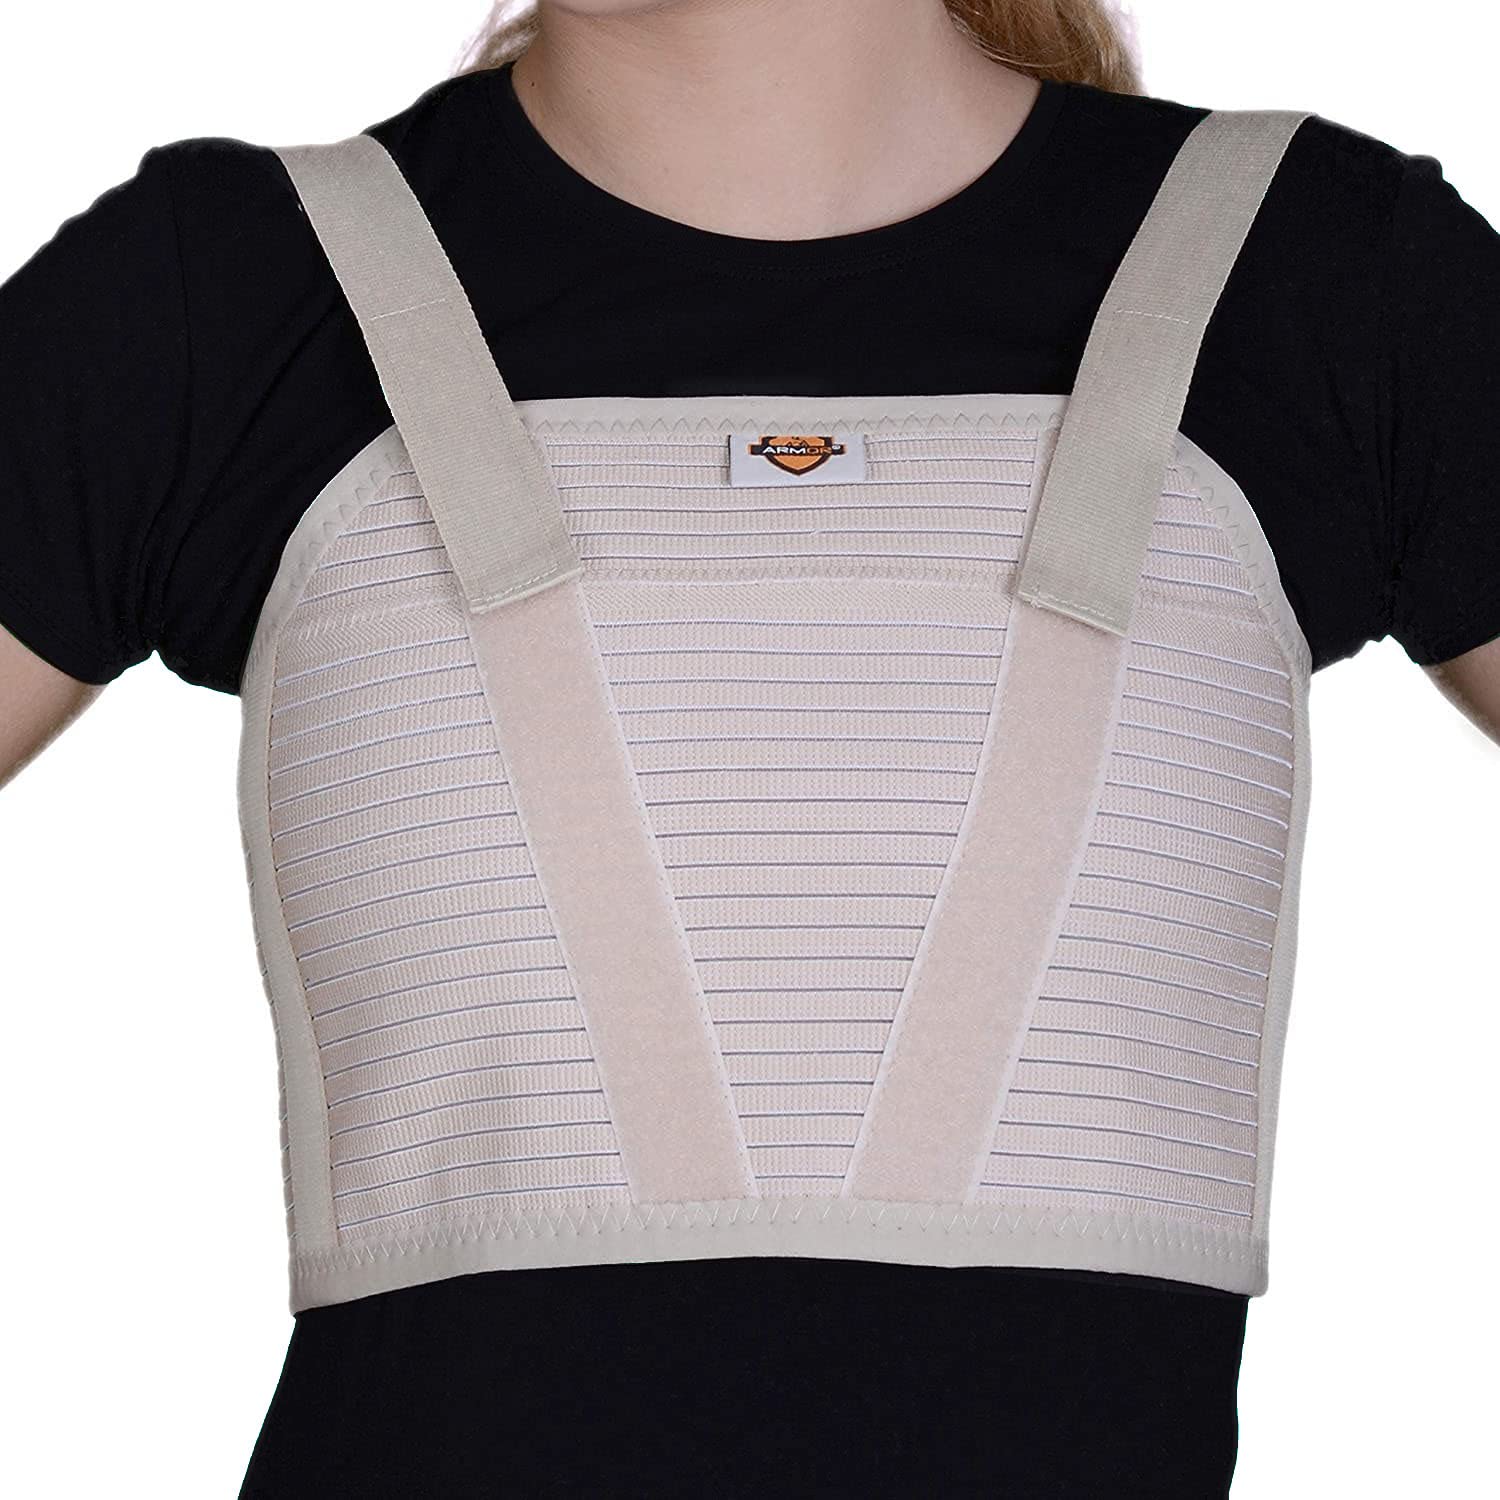 Sternum Support Brace, Breathable Sternum and Thorax Support